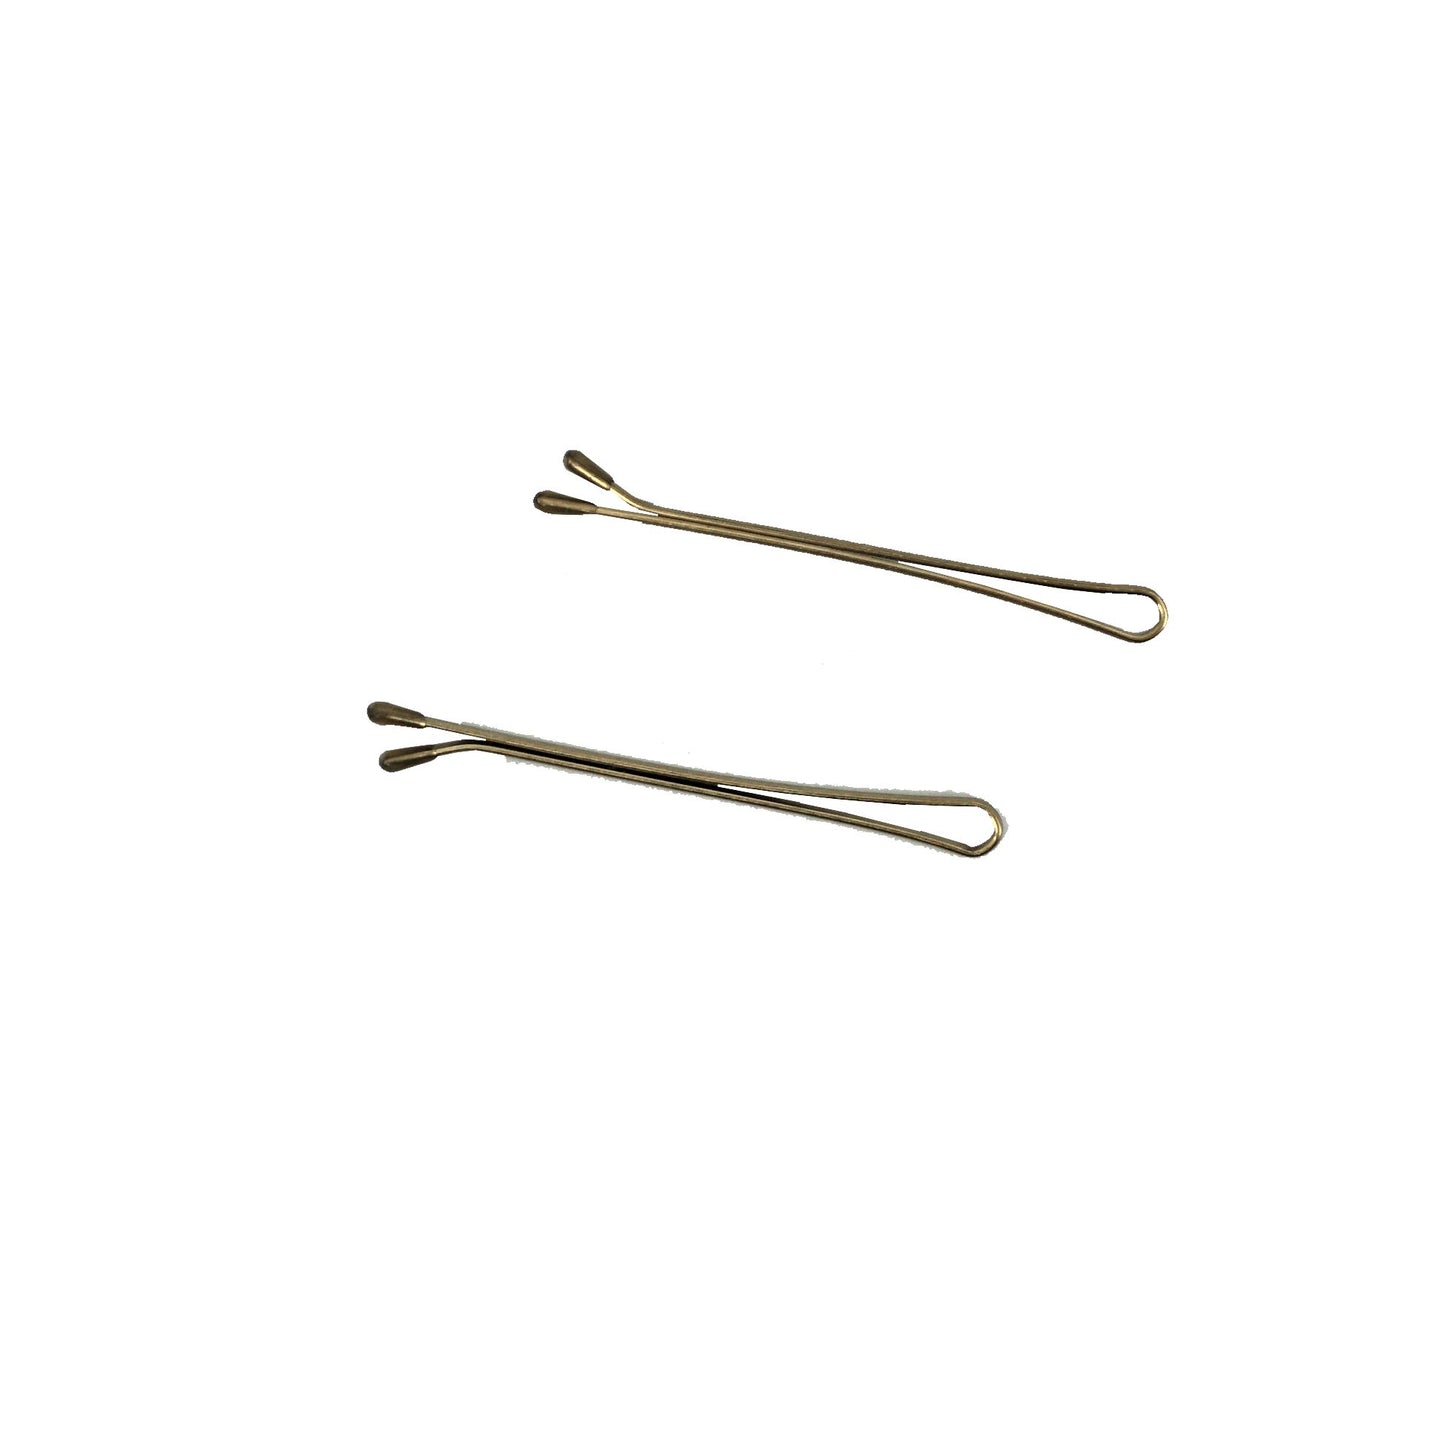 300, Brass Color, 2.0in (5.0cm), Italian Made Flat Bobby Pins, Recloseable Stay Clean and Organized Container